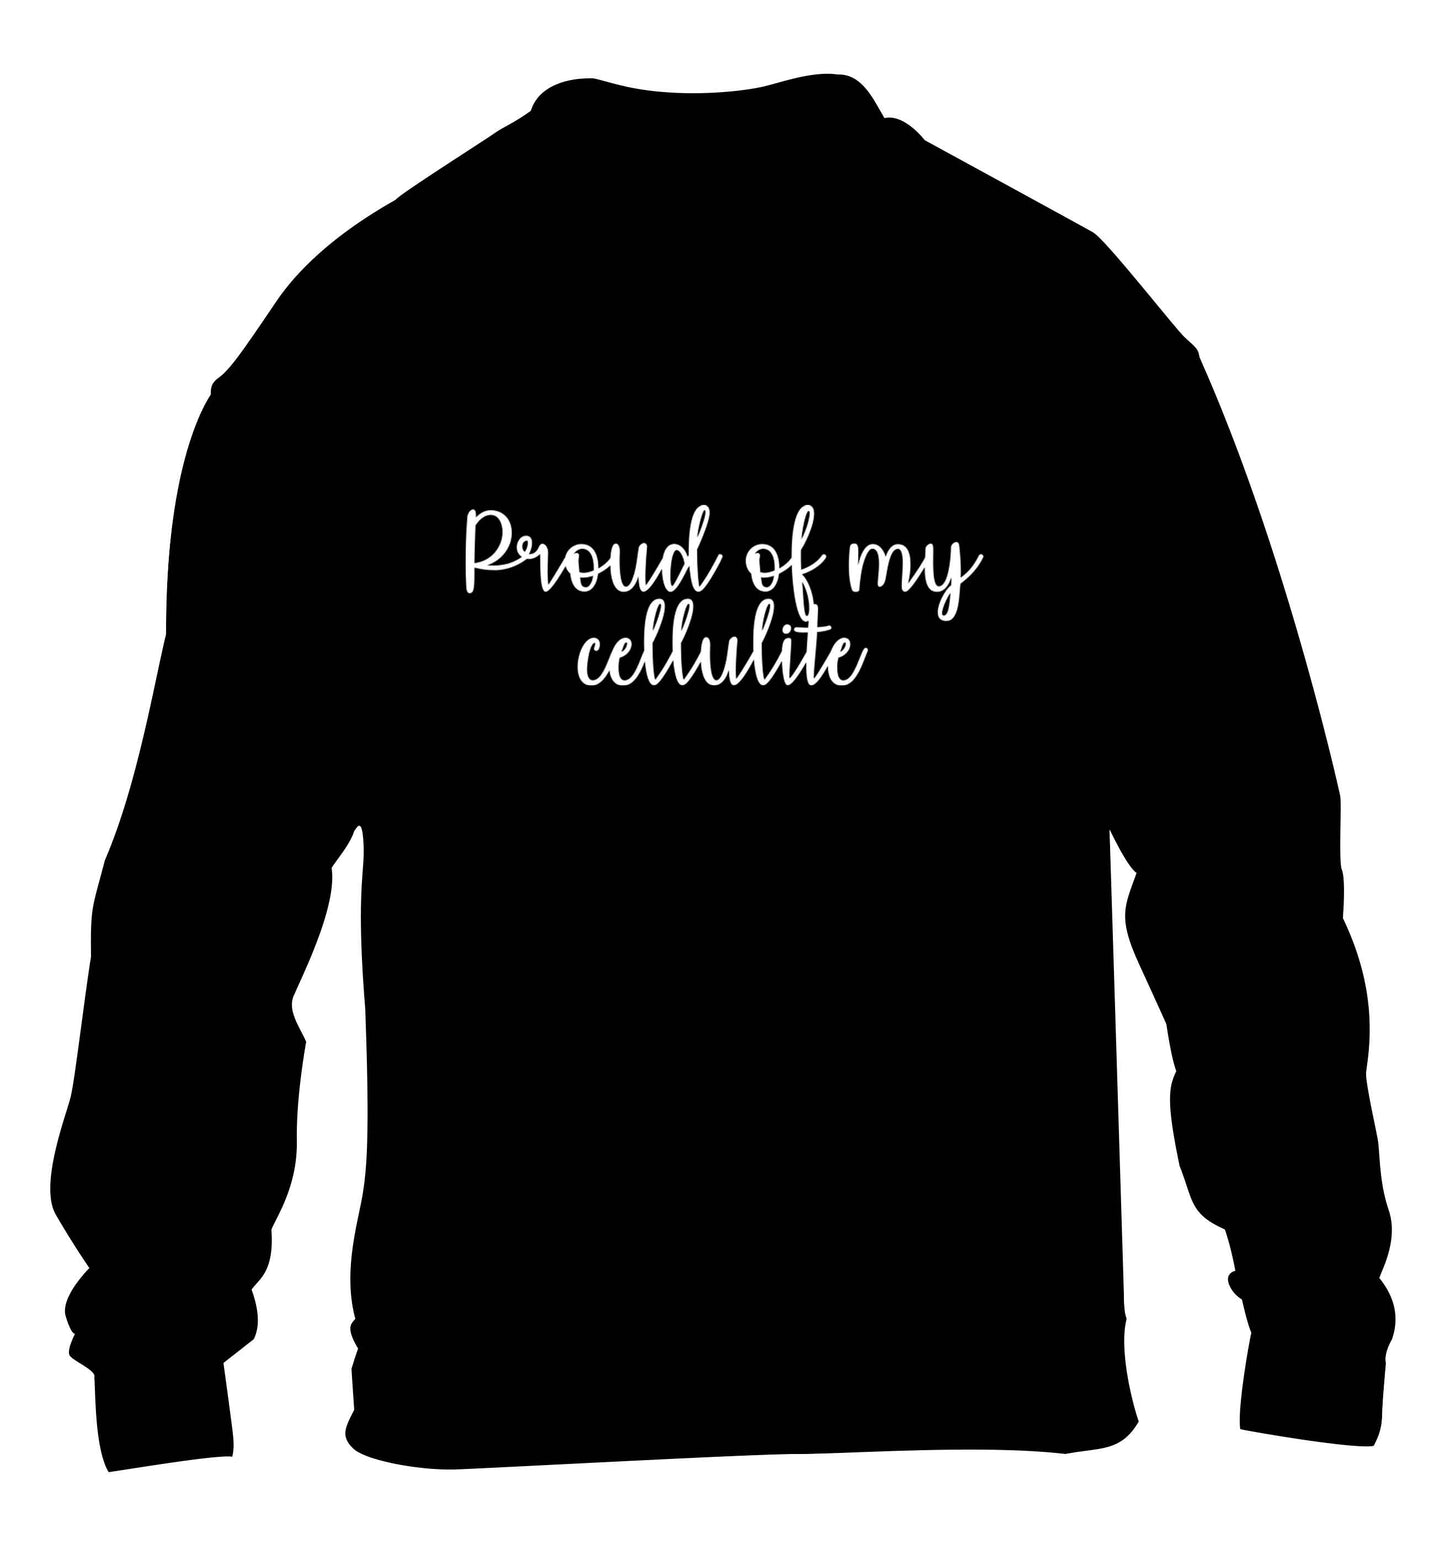 Proud of my cellulite children's black sweater 12-13 Years